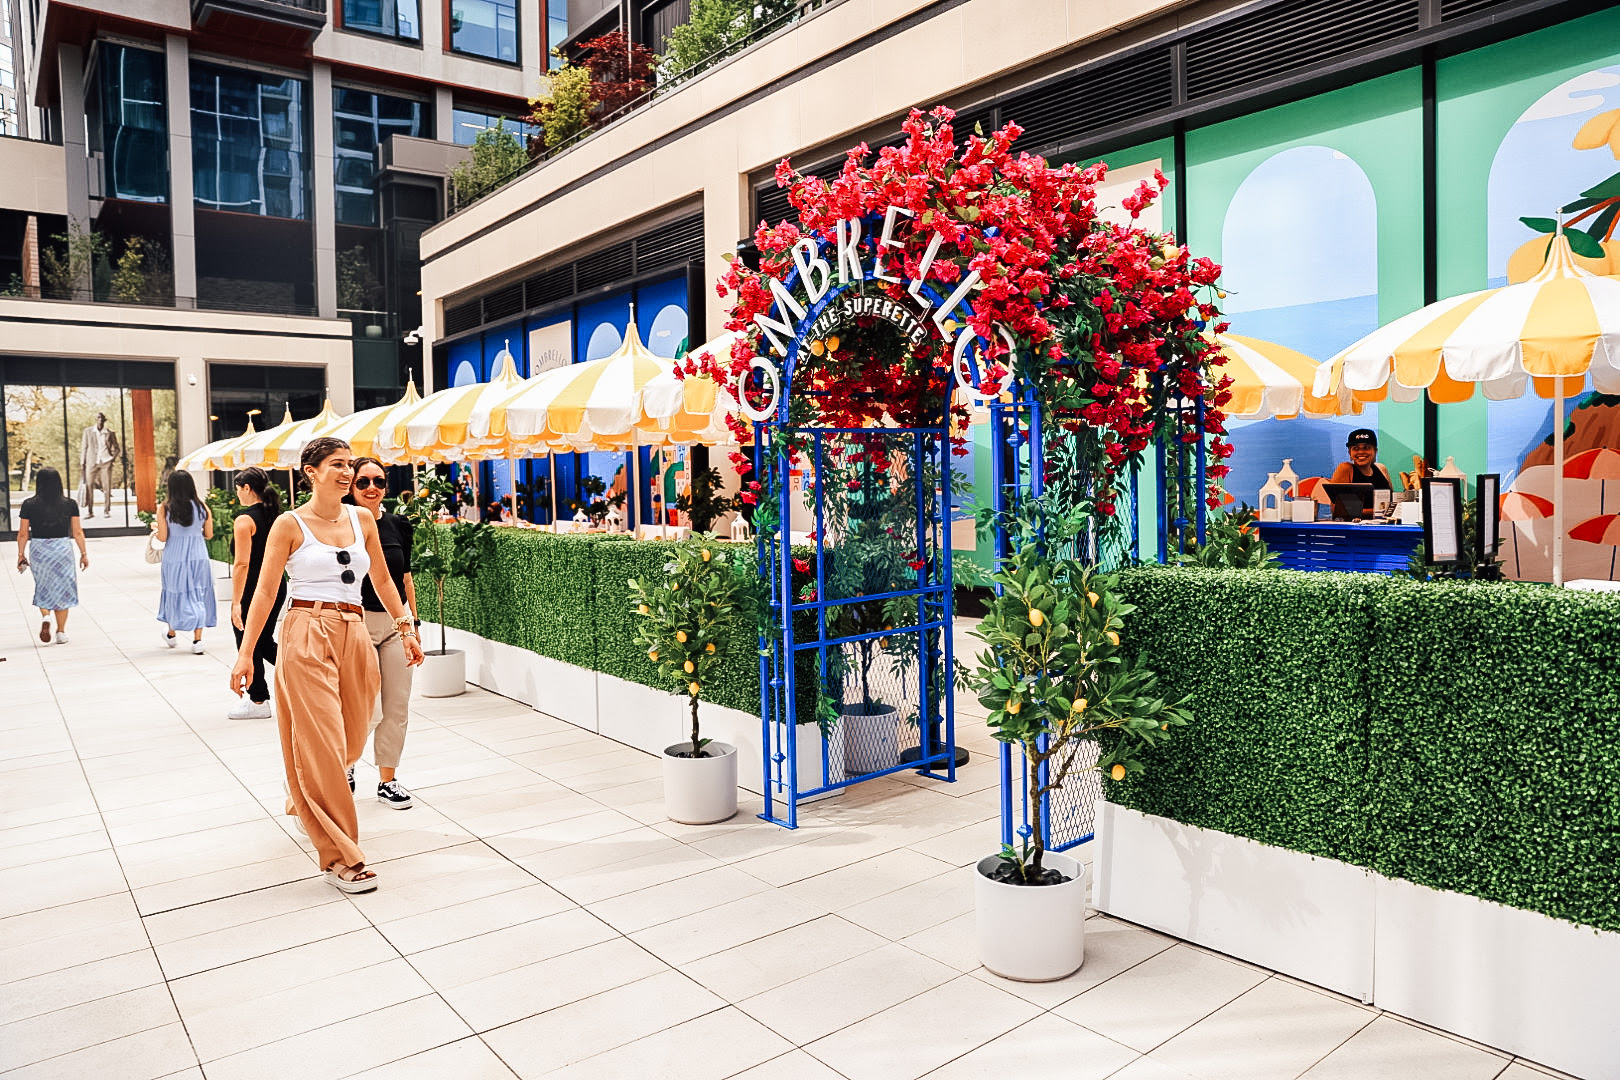 A blue trellis covered with pink flowers holds signage that says Ombrello. It leads into a colorful sidewalk patio setup on a city street.